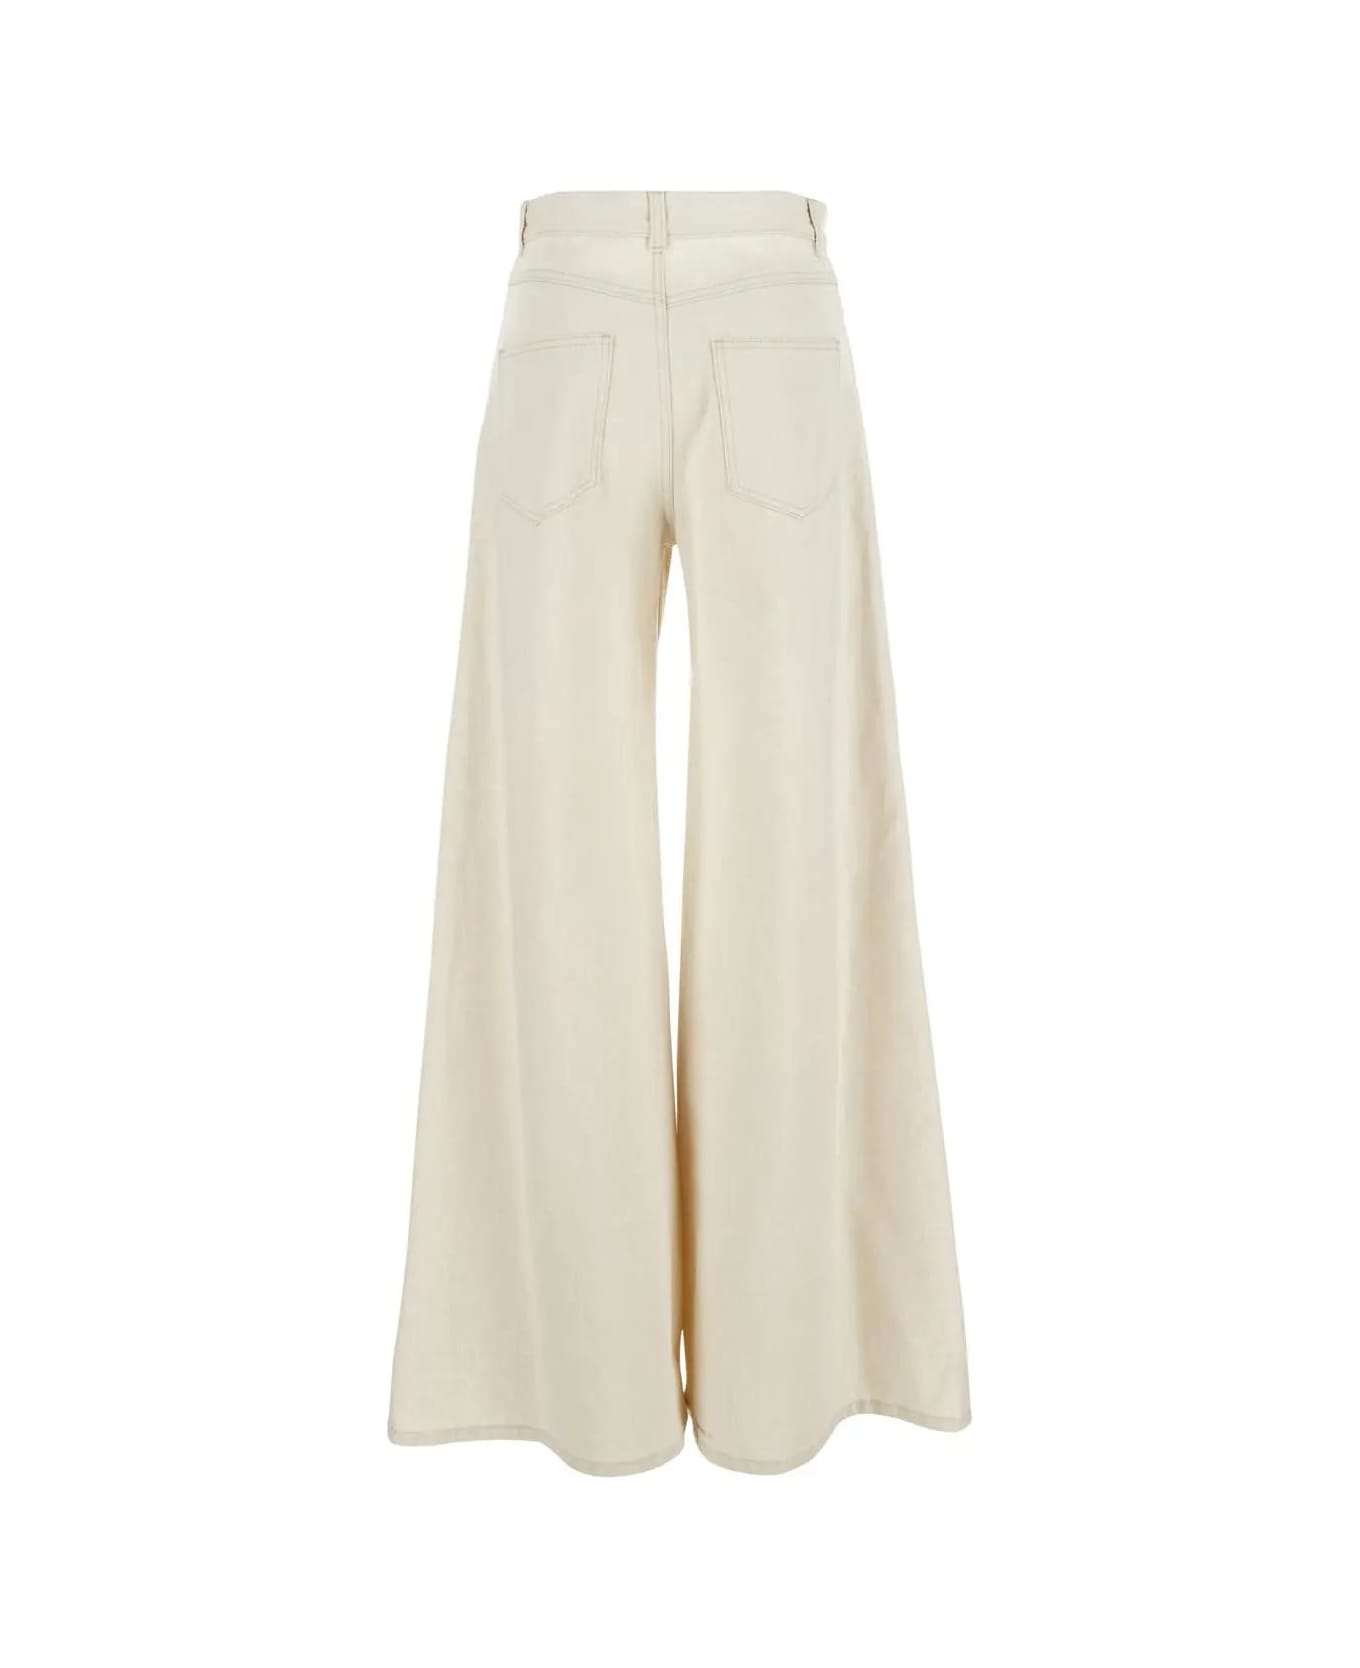 Chloé Cotton Trousers - Iconic milk ボトムス